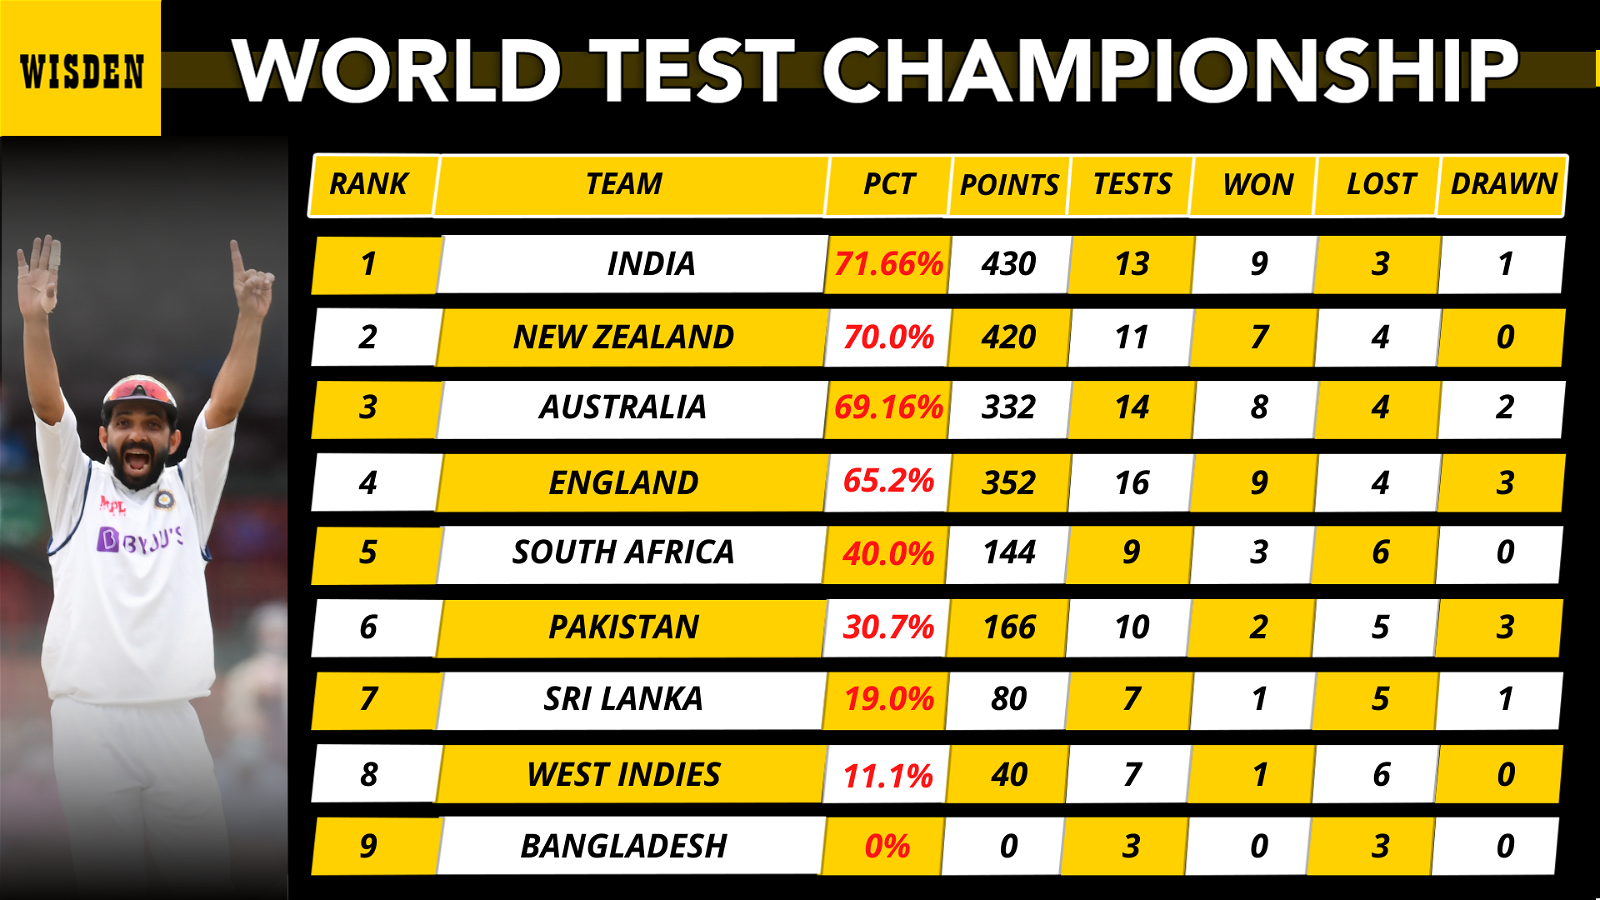 World Test Championship Updated Standings After India's Brisbane Win